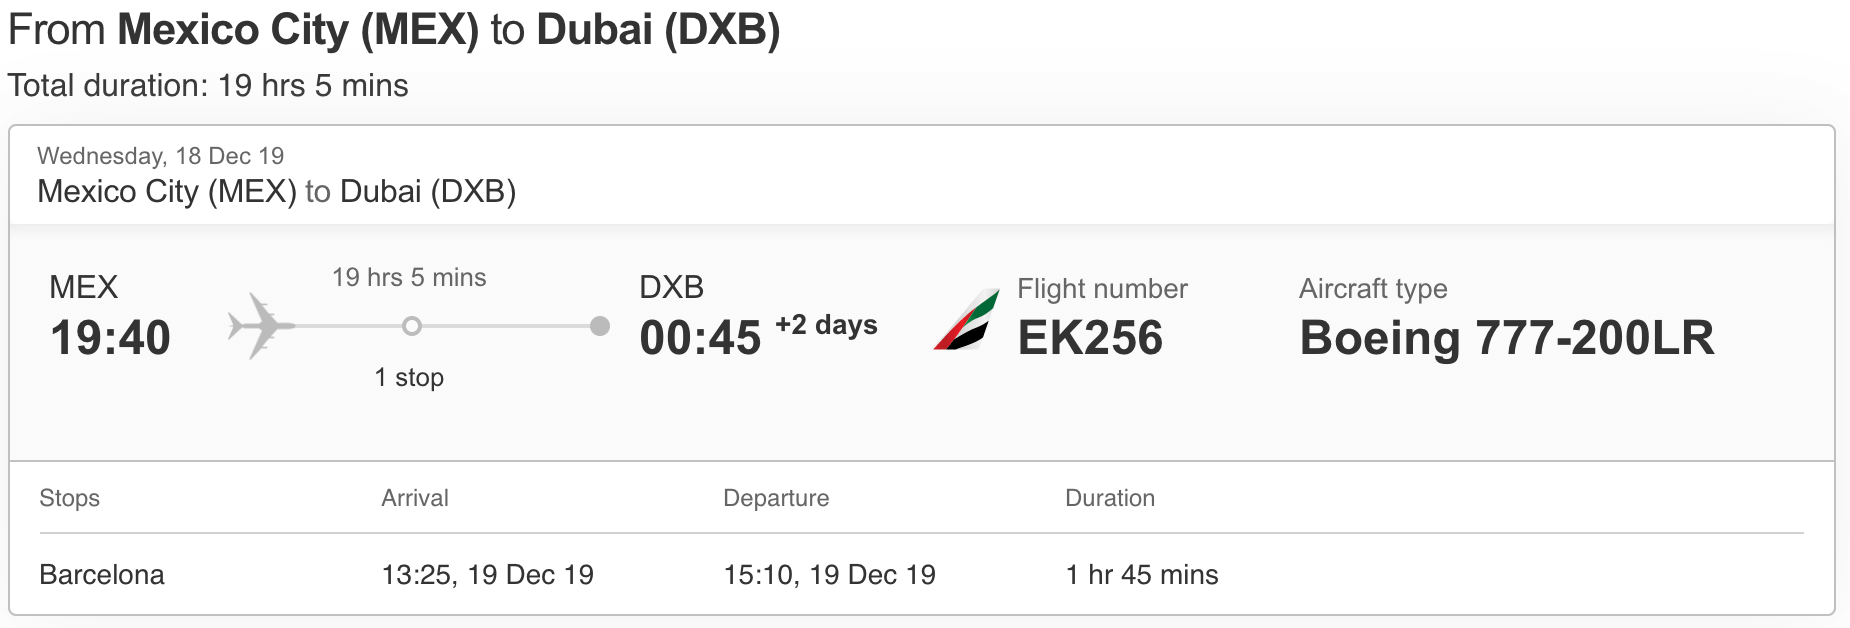 Emirates flight schedule between Mexico City (MEX) and Dubai (DXB)